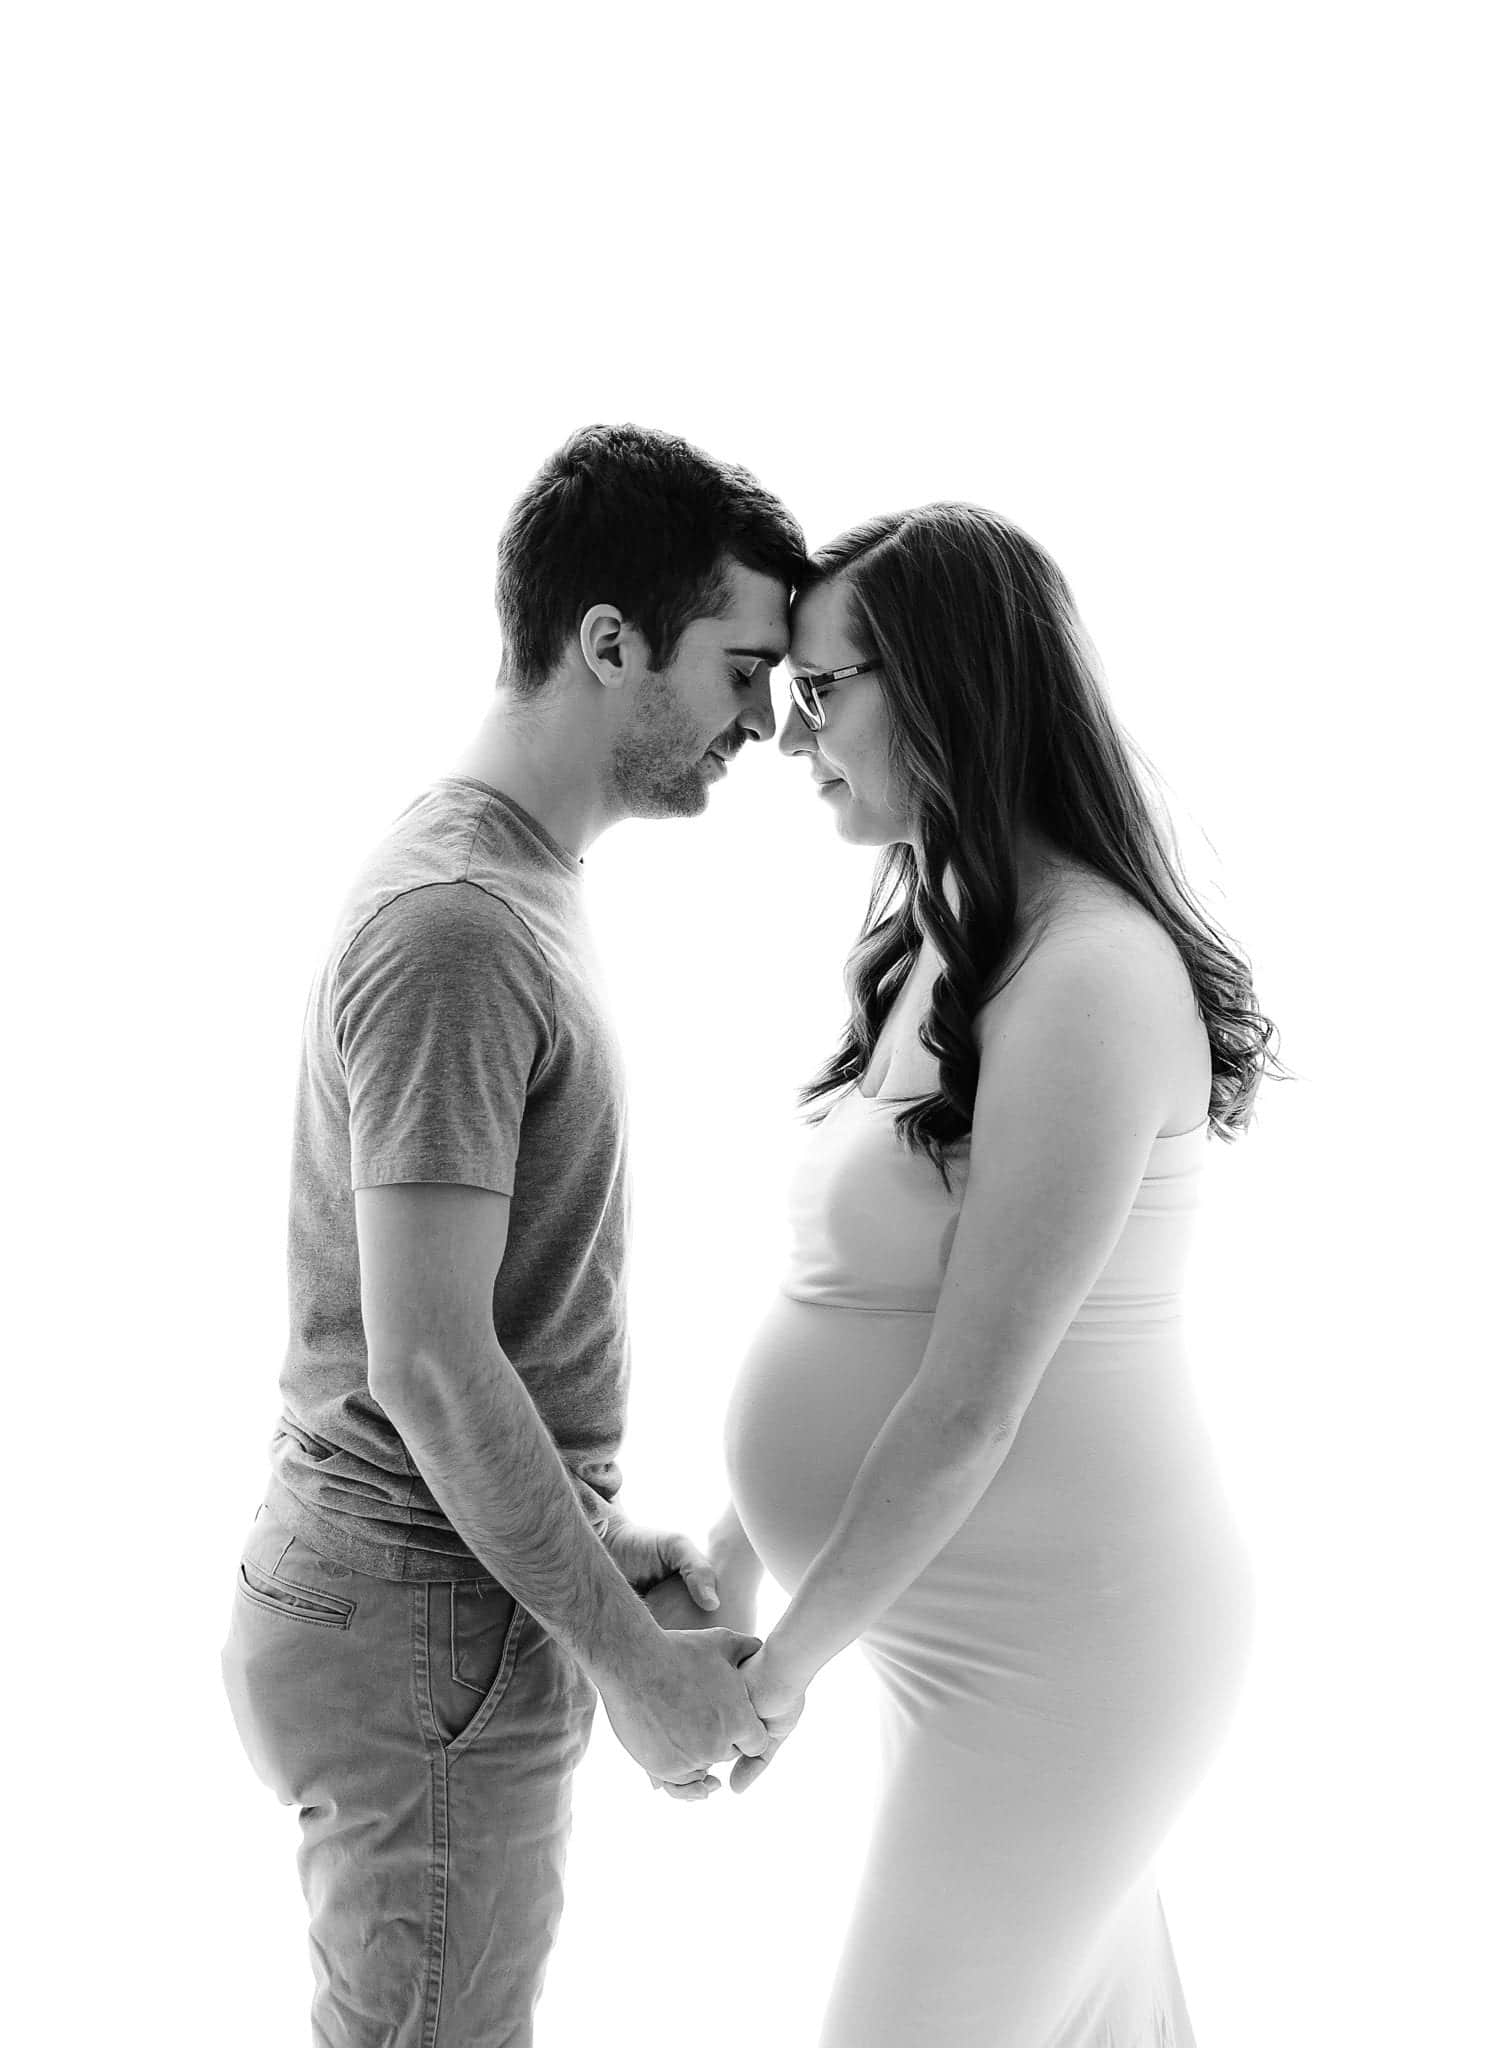 Pregnancy pictures | Capturing your growing baby and belly